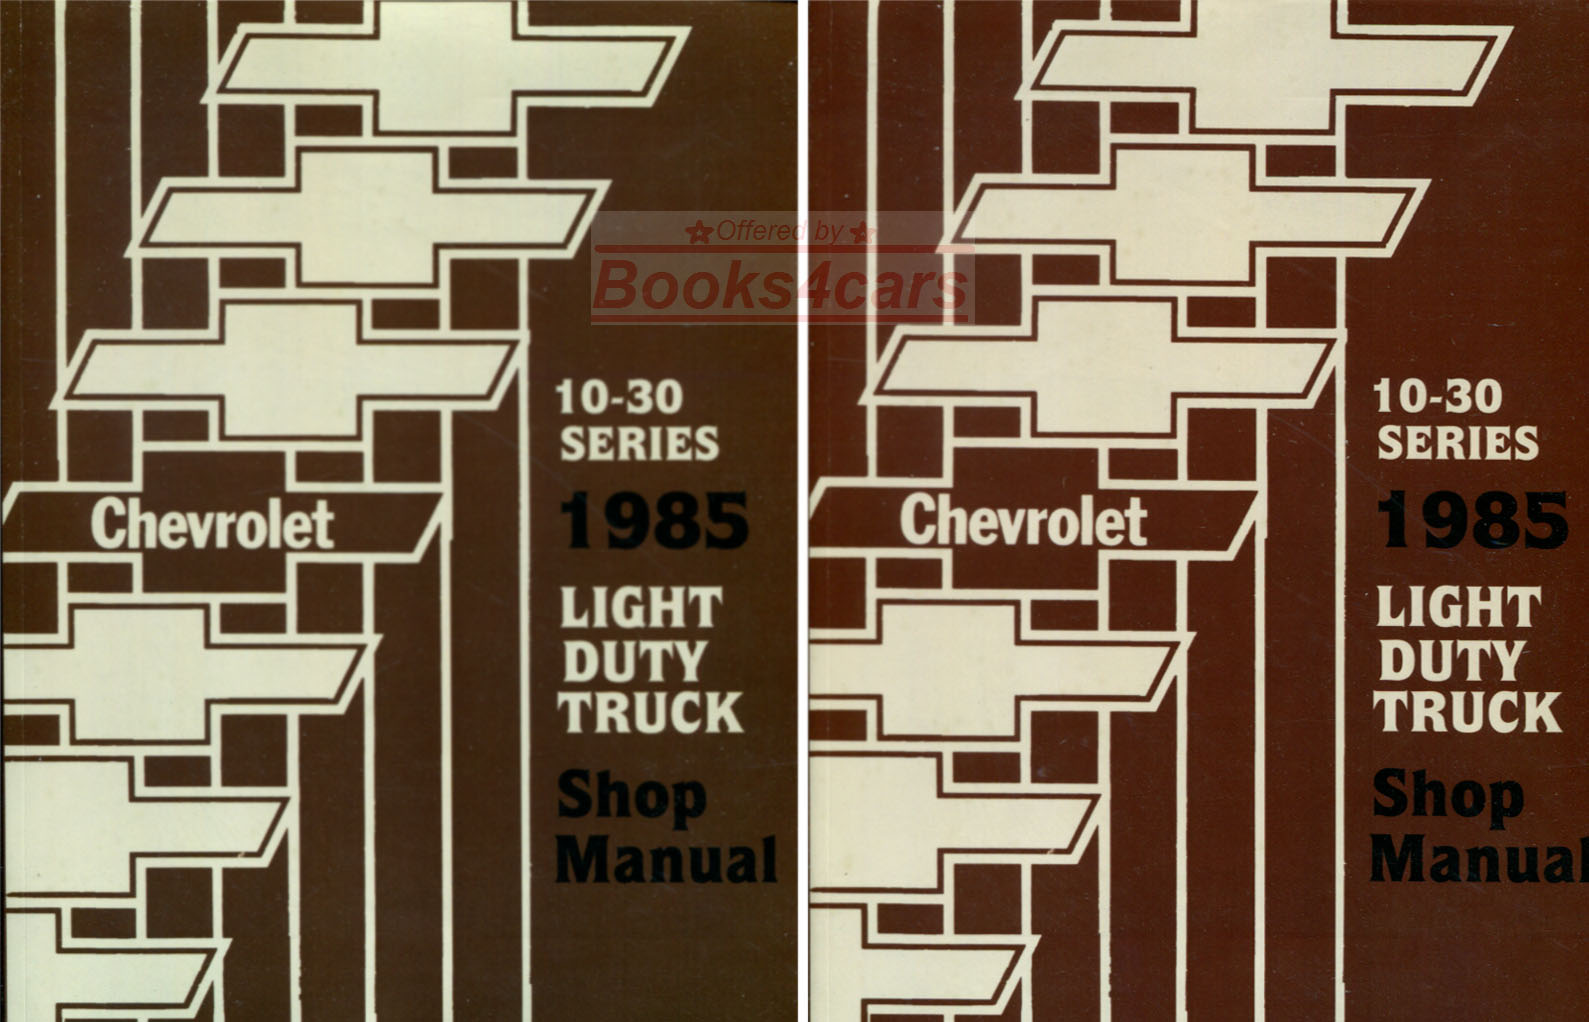 85 C K G P Light Duty C/K Truck Shop Service Repair Manual by Chevrolet & GMC series 10-30 1,200 pages full size pickup truck Blazer Suburban Van P chassis motorhome gas & diesel engines